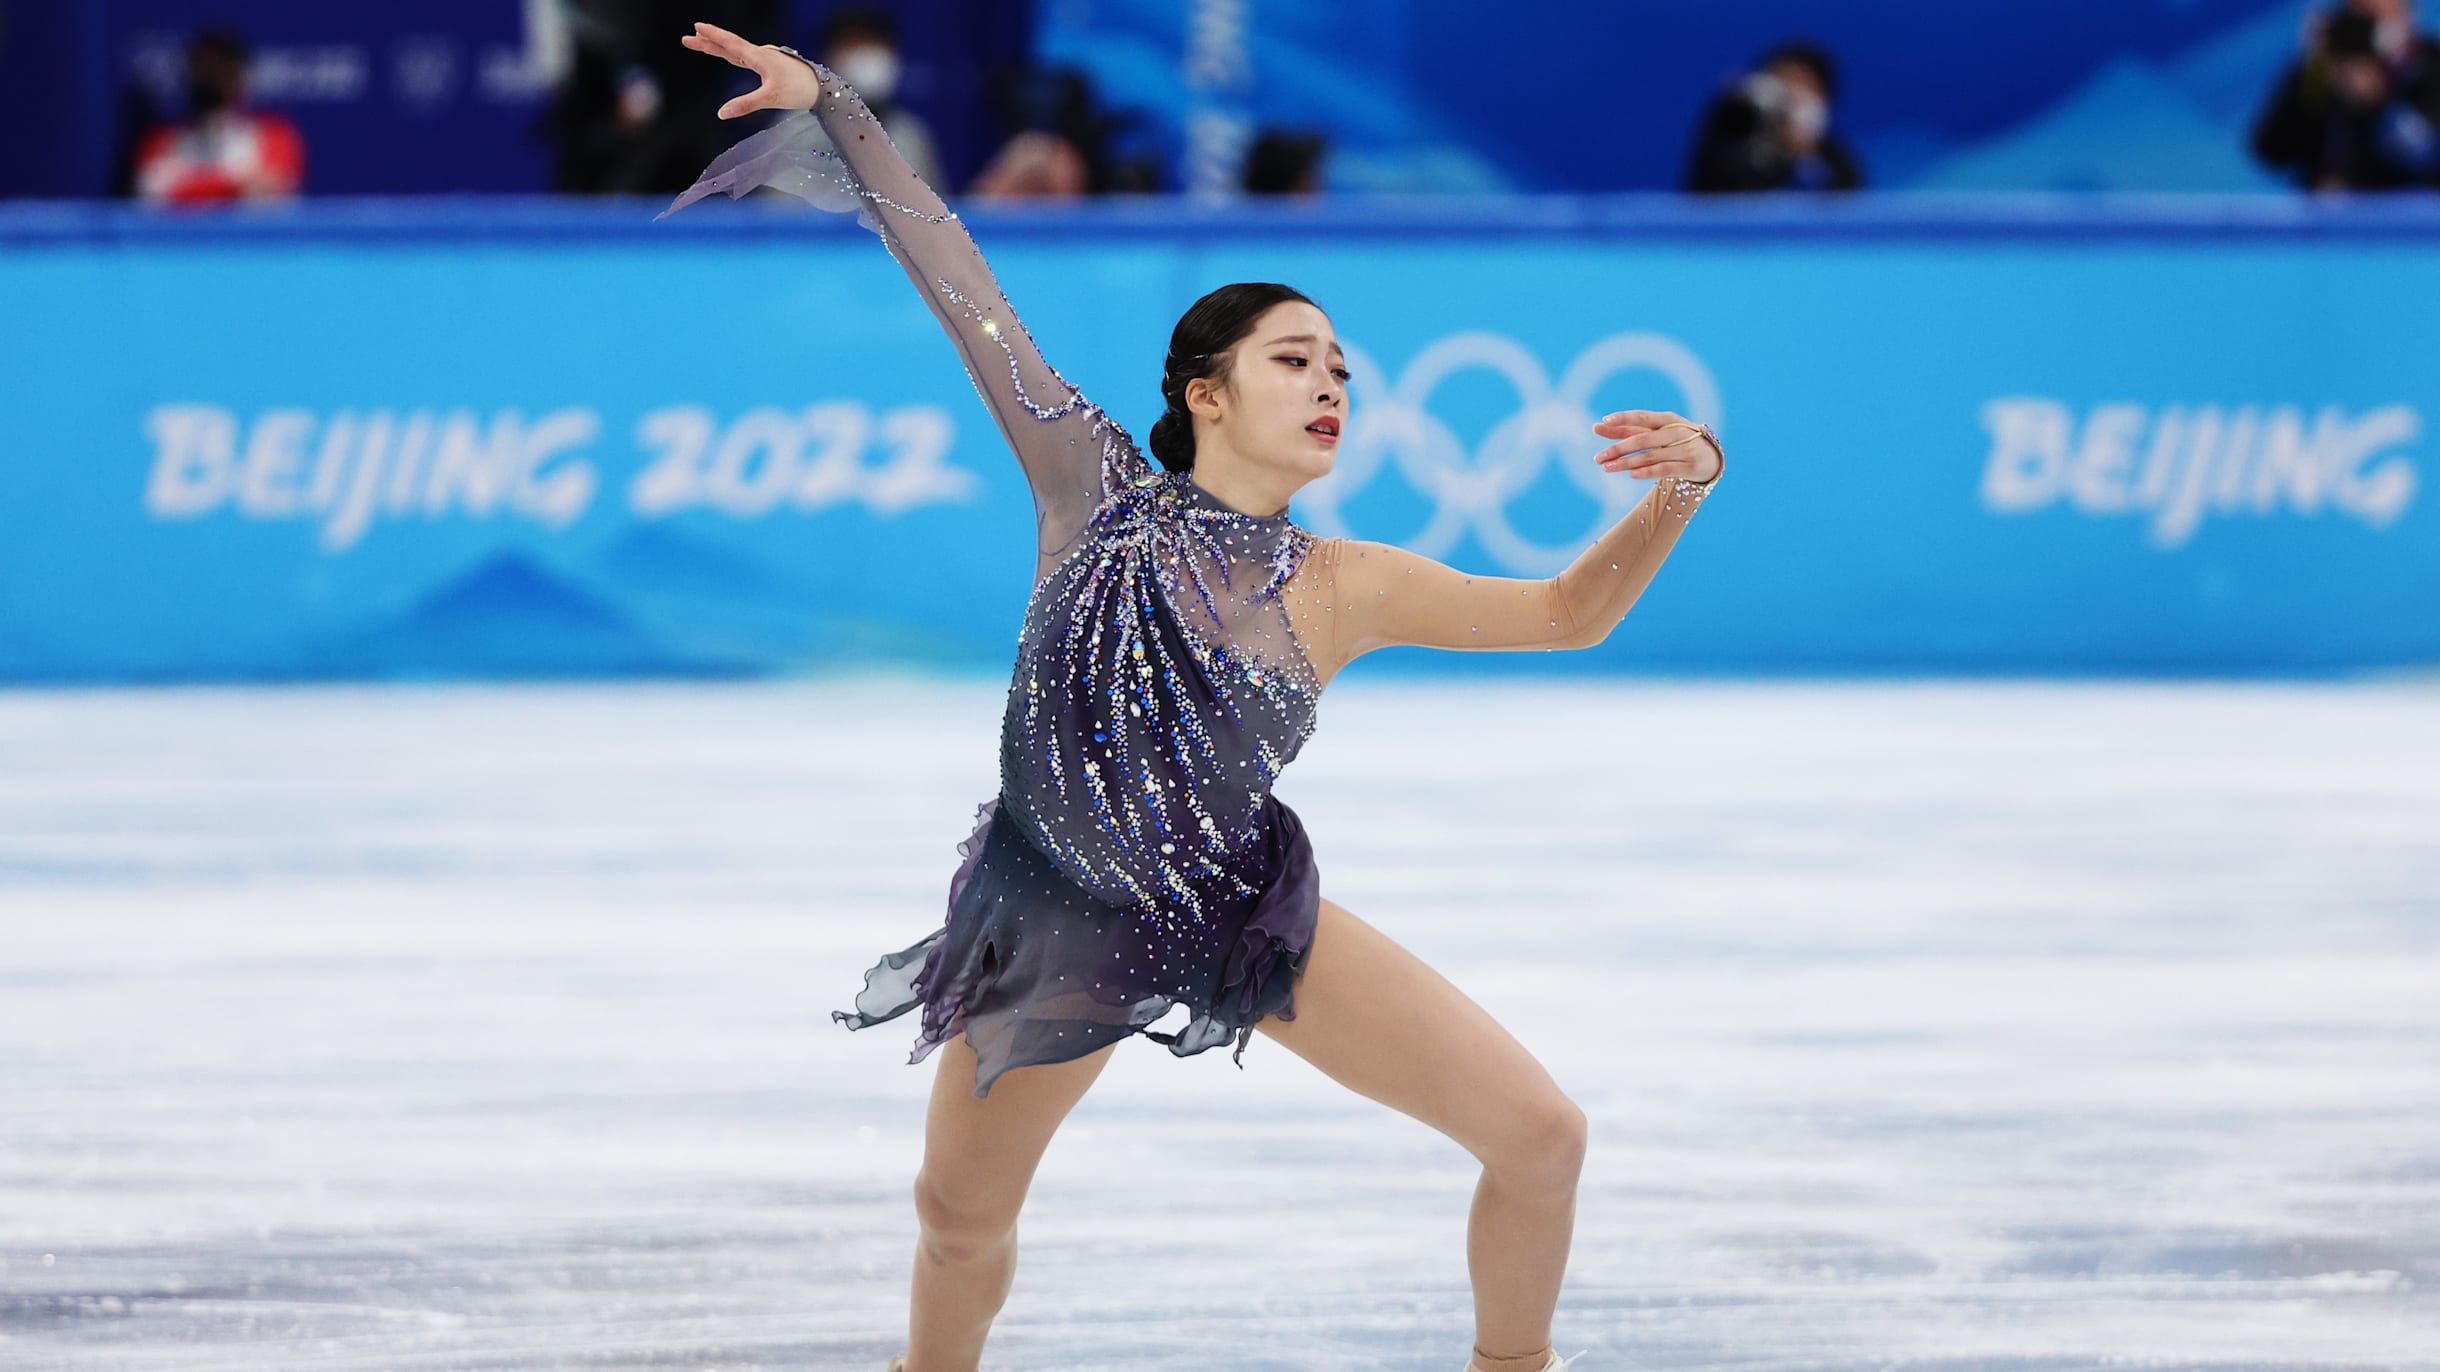 You Young and seven other up-and-coming female figure skating stars to watch